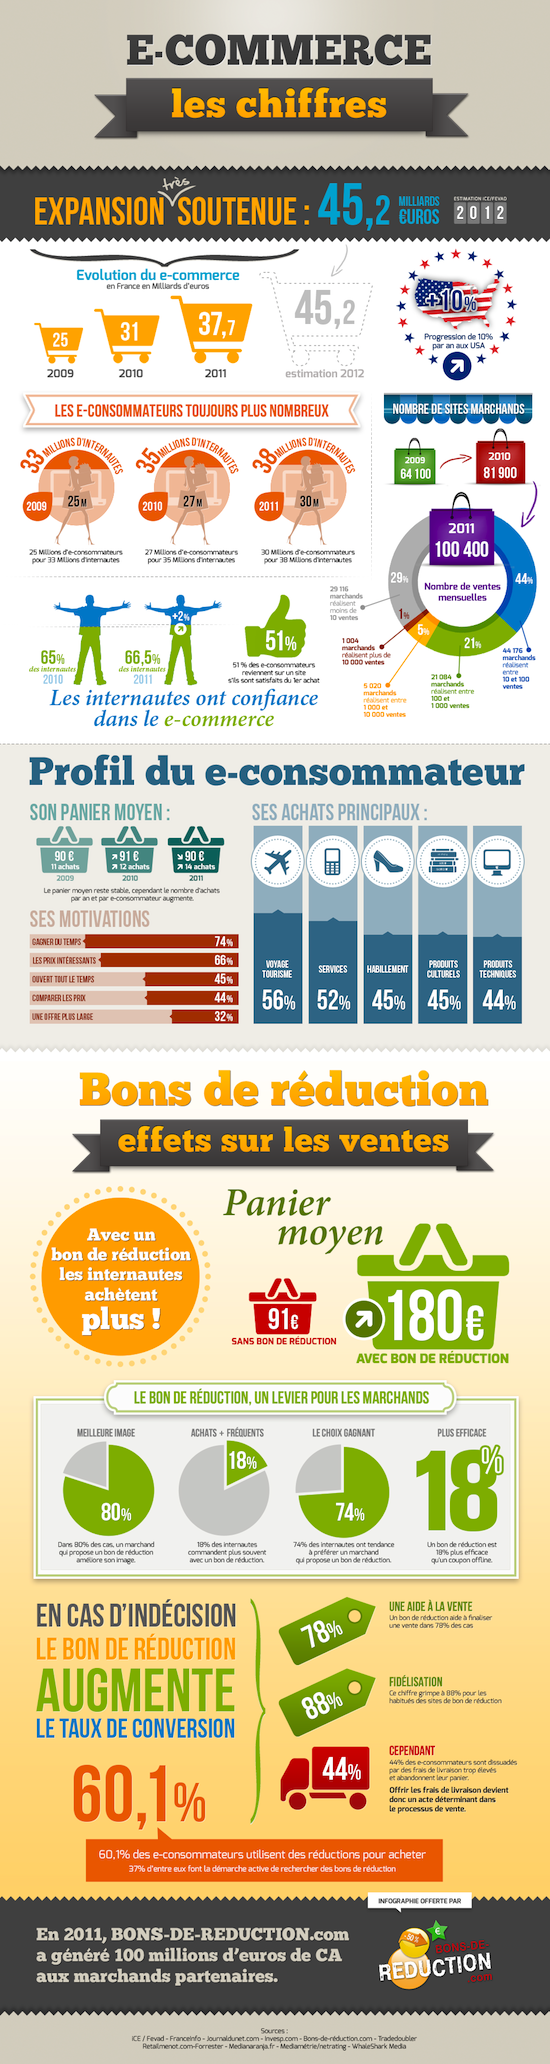 Infographie ecommerce